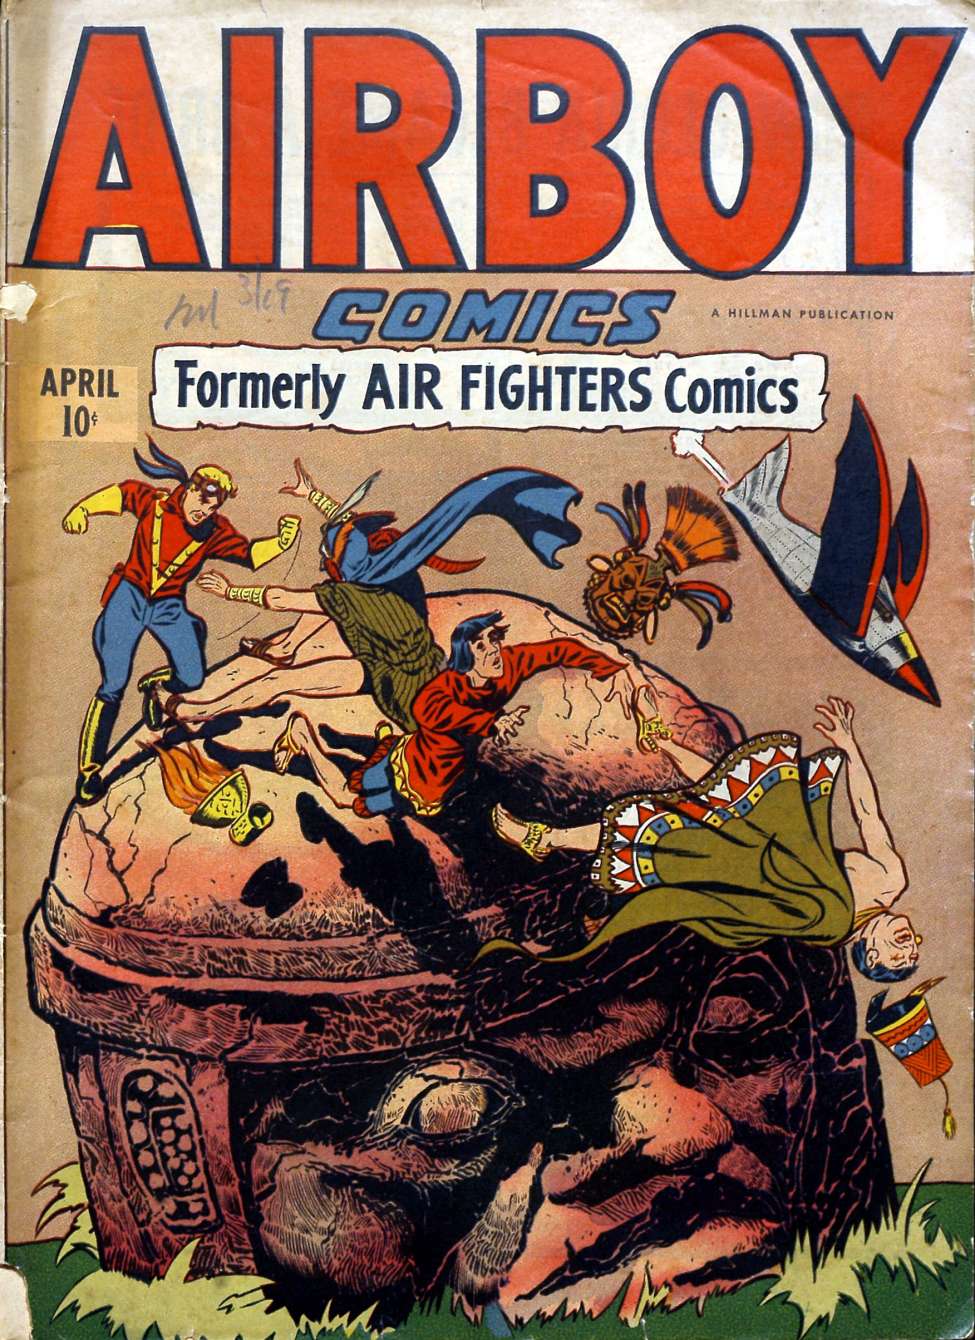 Book Cover For Airboy Comics v3 2